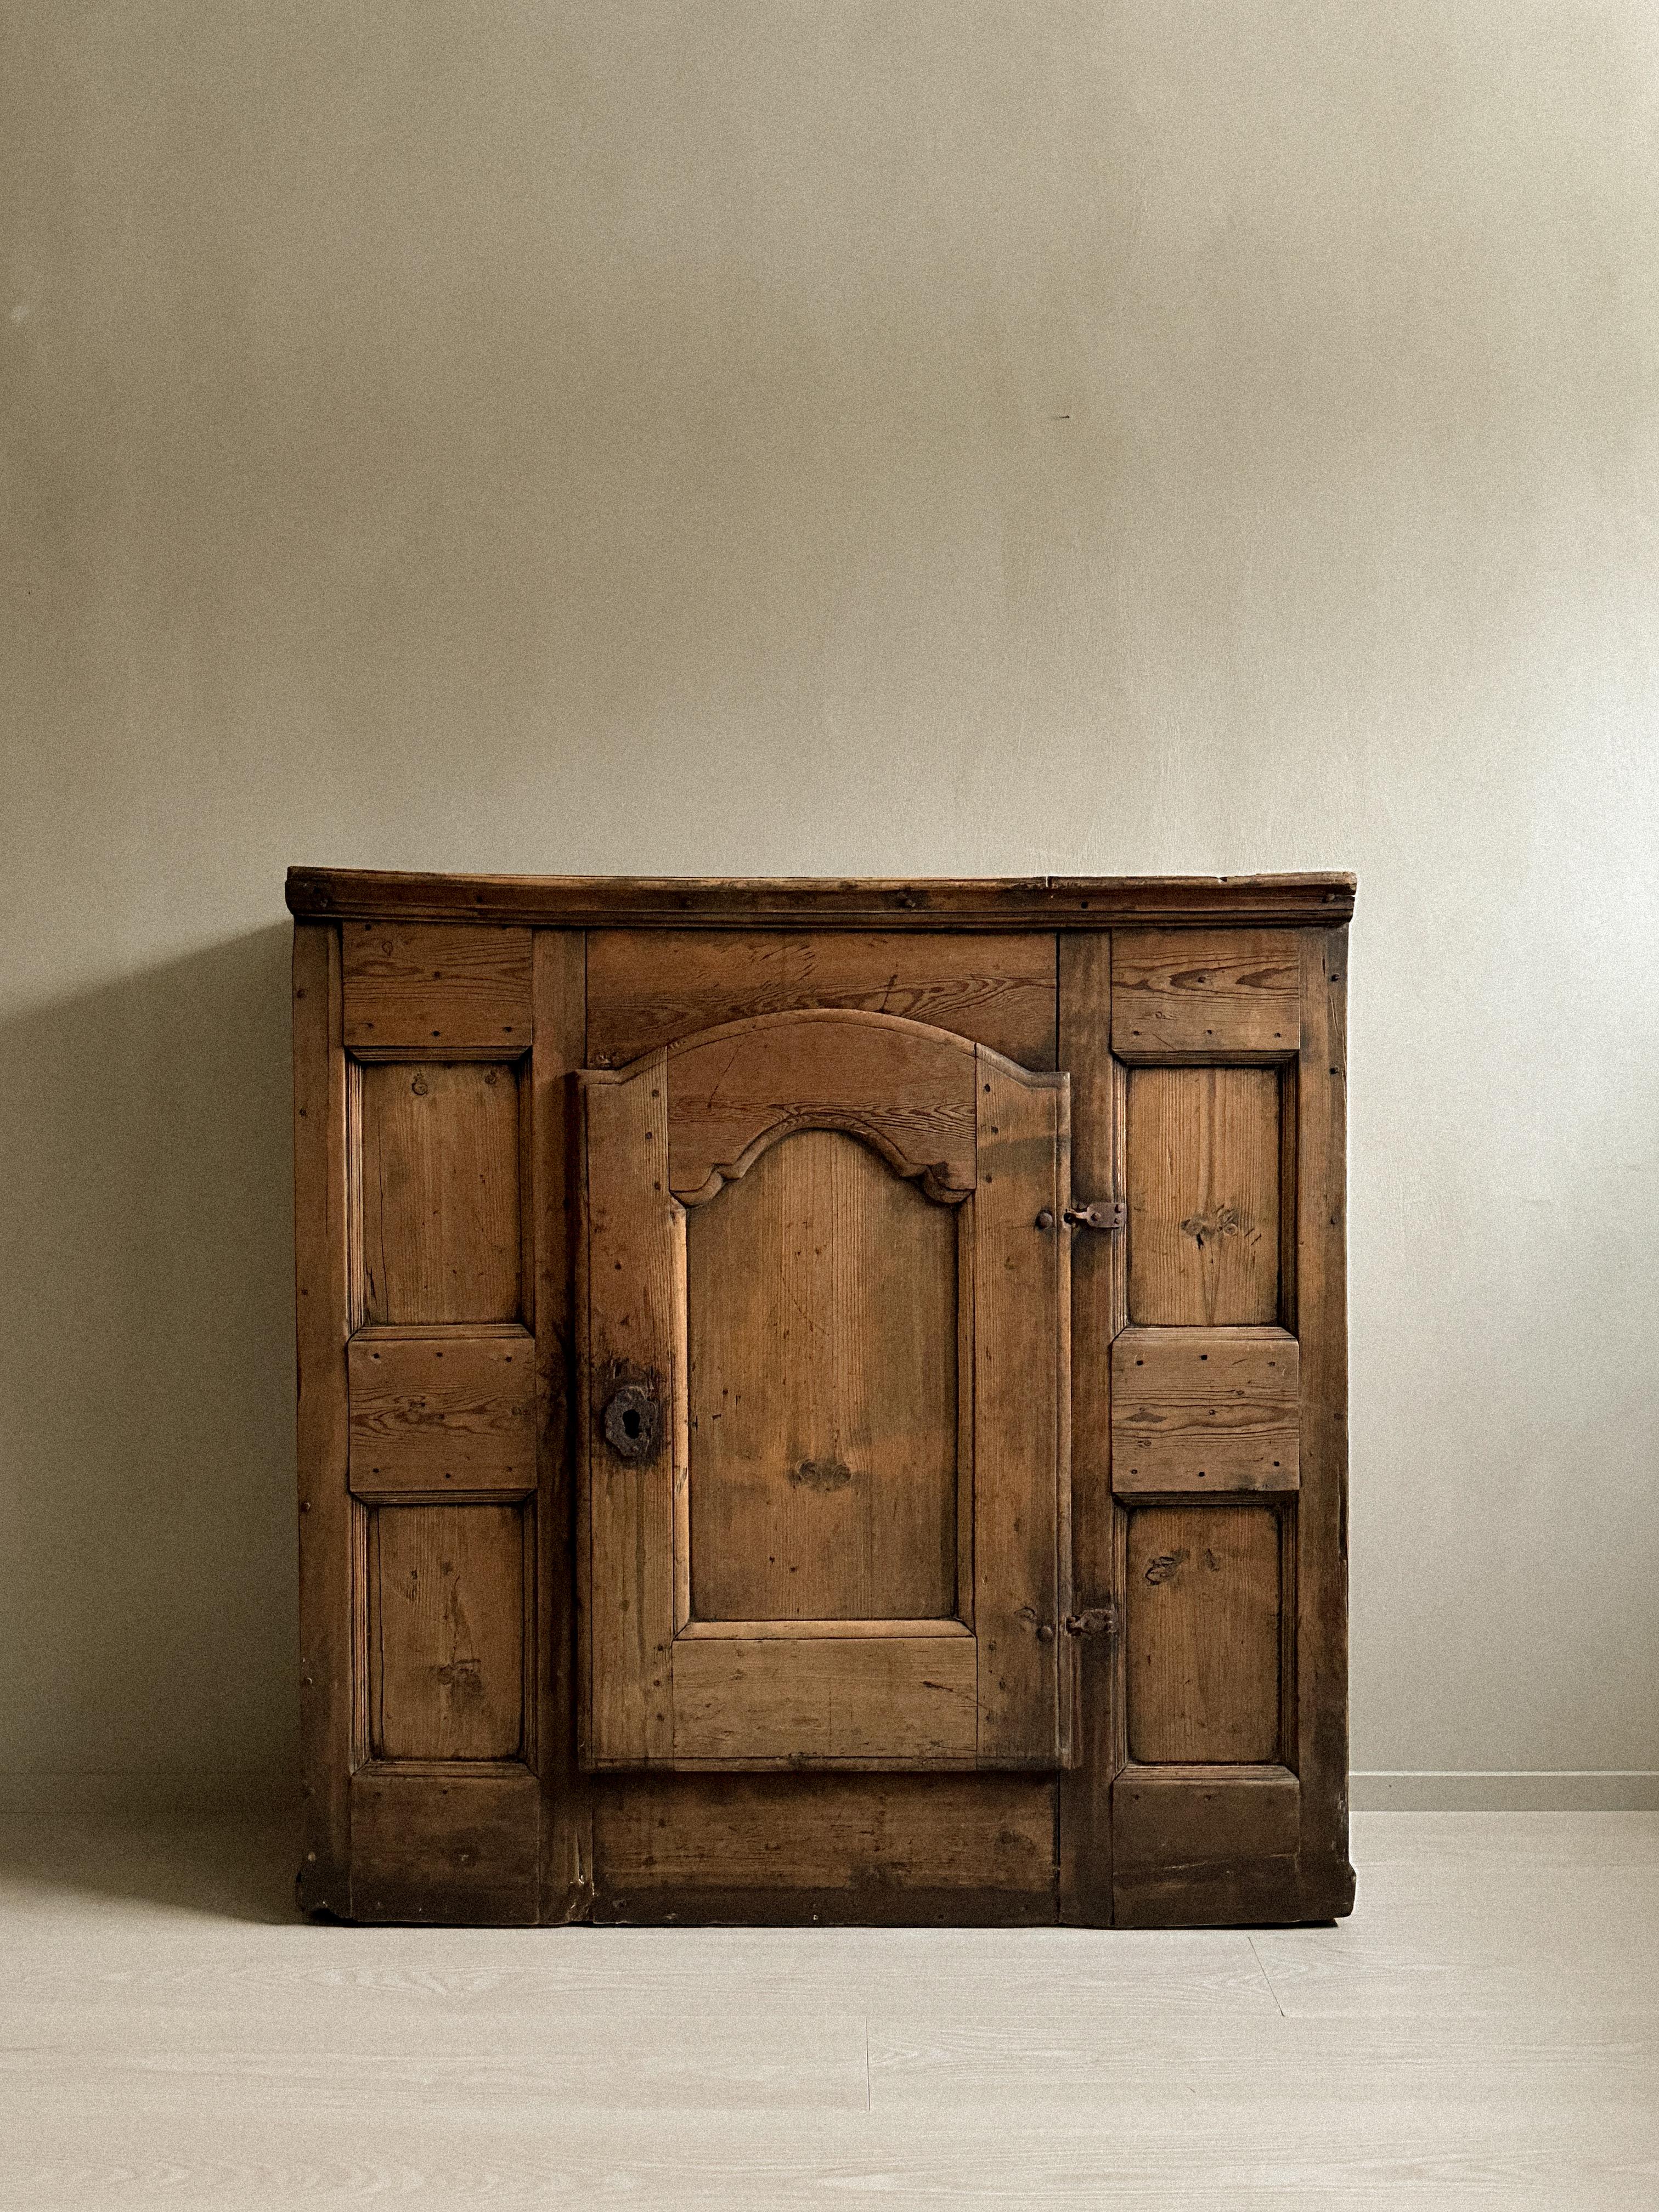 A Wonderful Primitive Cupboard, Unknown designer, Scandinavia, c. 1800s. This case piece embraces the wabi-sabi lifestyle and brings warmth to your space.